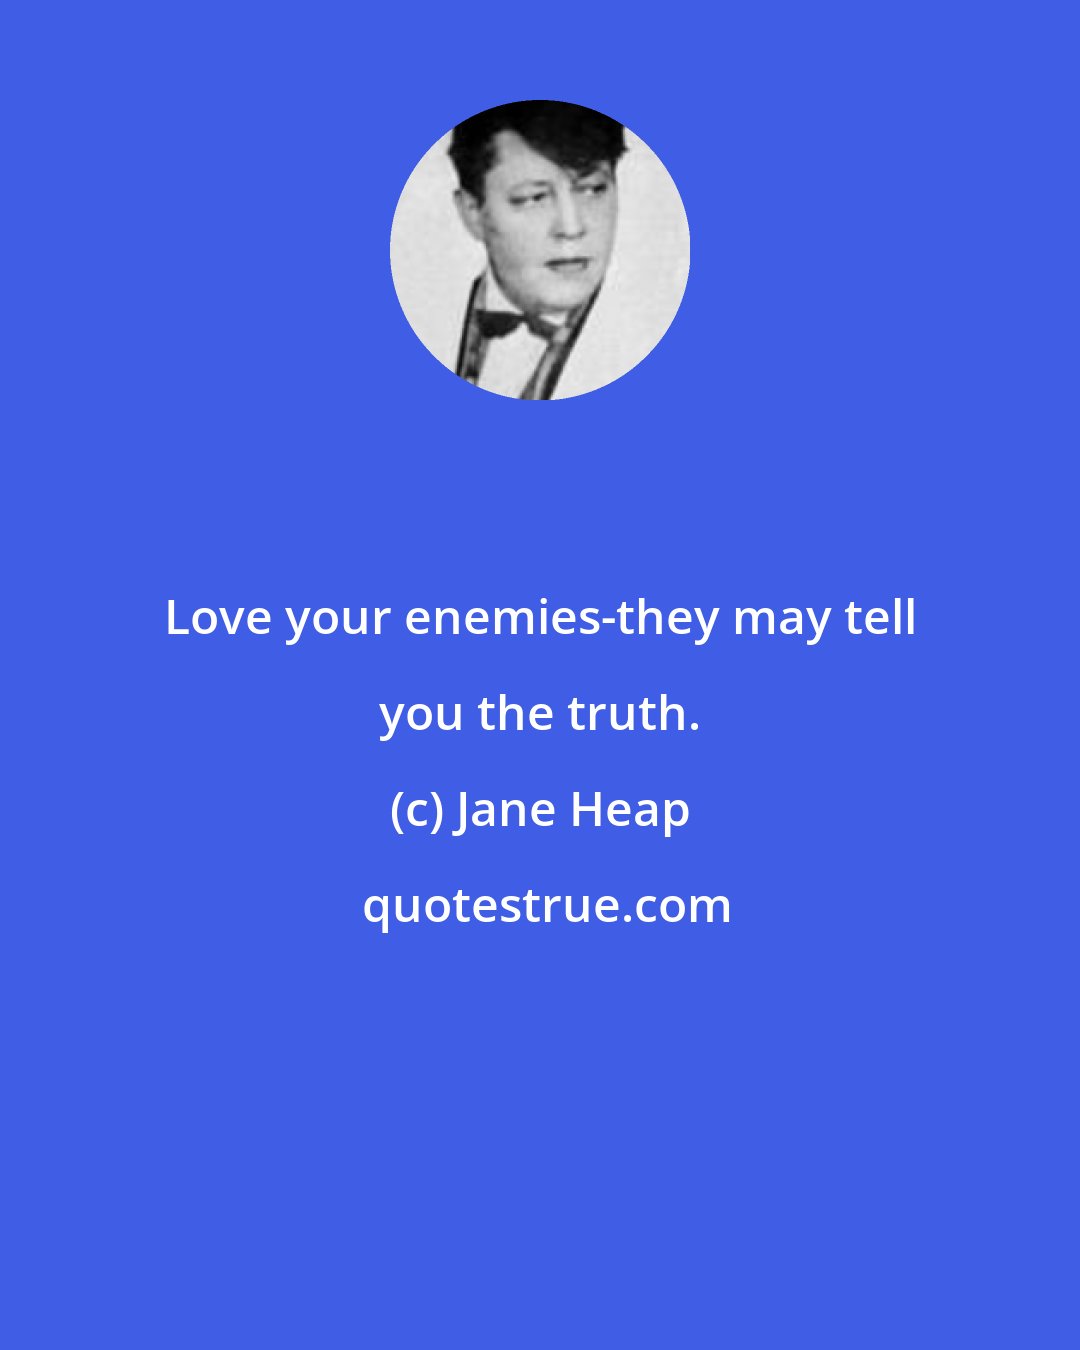 Jane Heap: Love your enemies-they may tell you the truth.